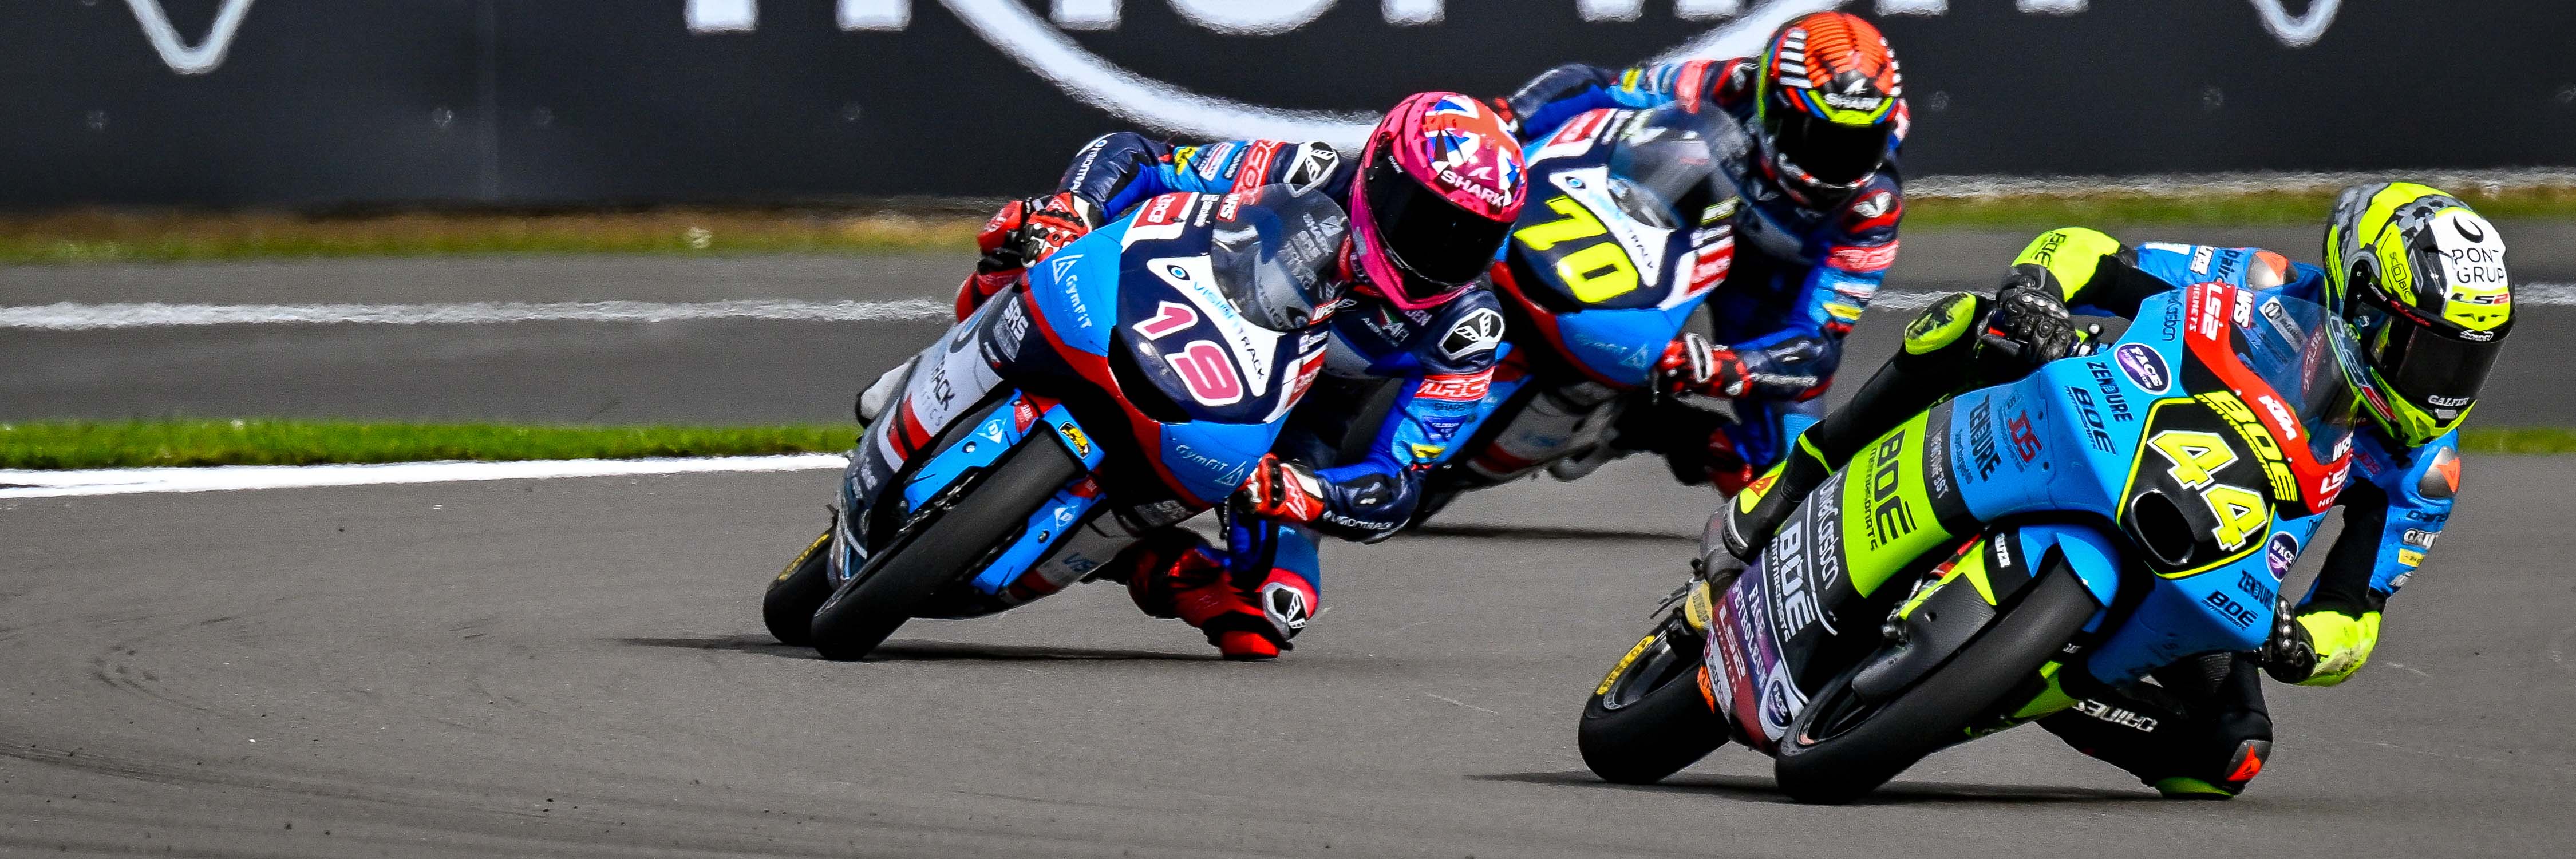 Scott Ogden and other riders qualifying in Moto3